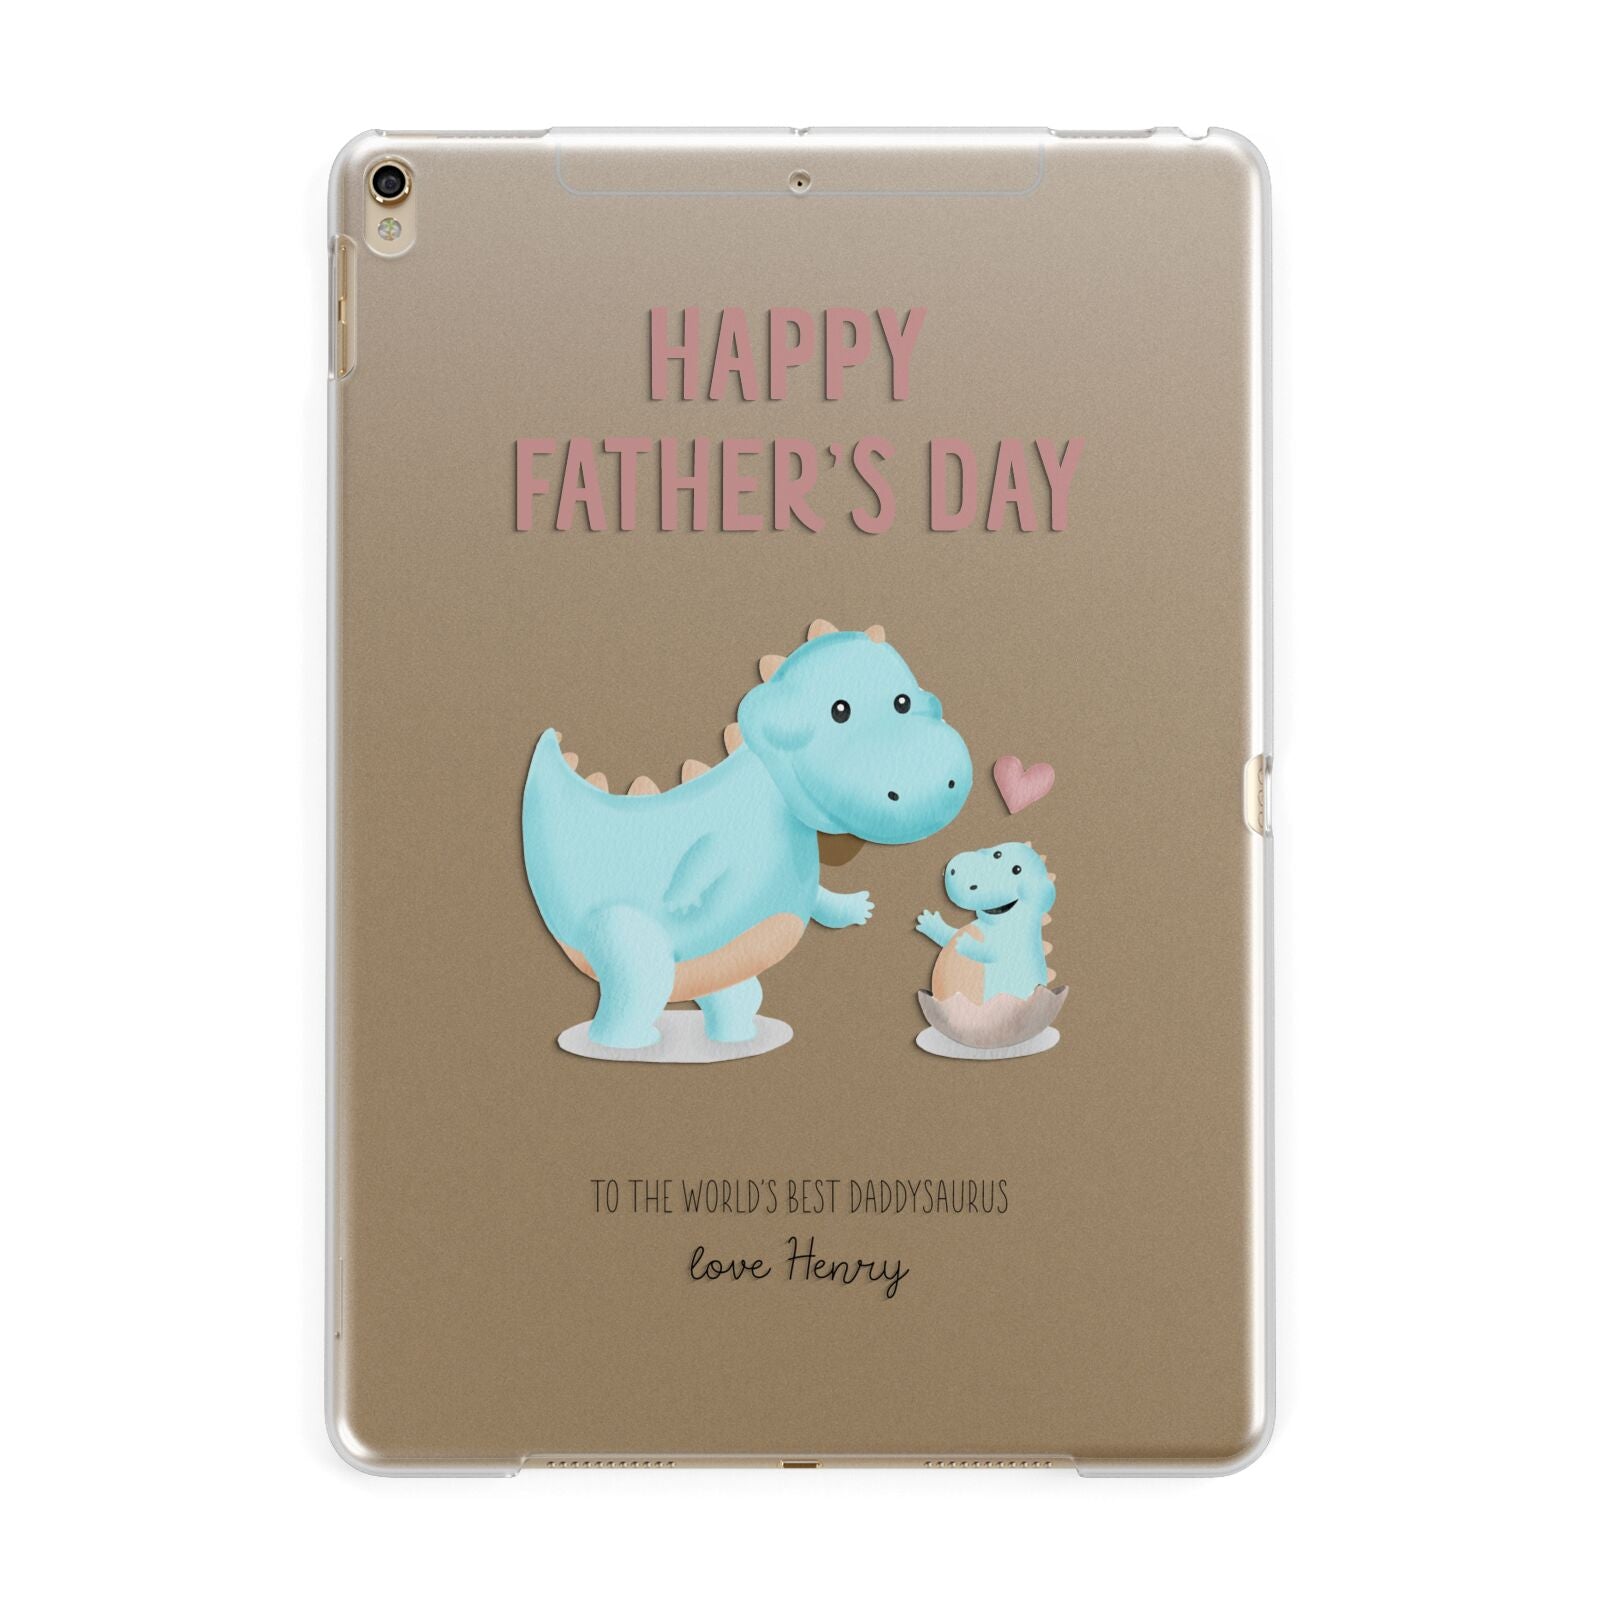 Happy Fathers Day Daddysaurus Apple iPad Gold Case